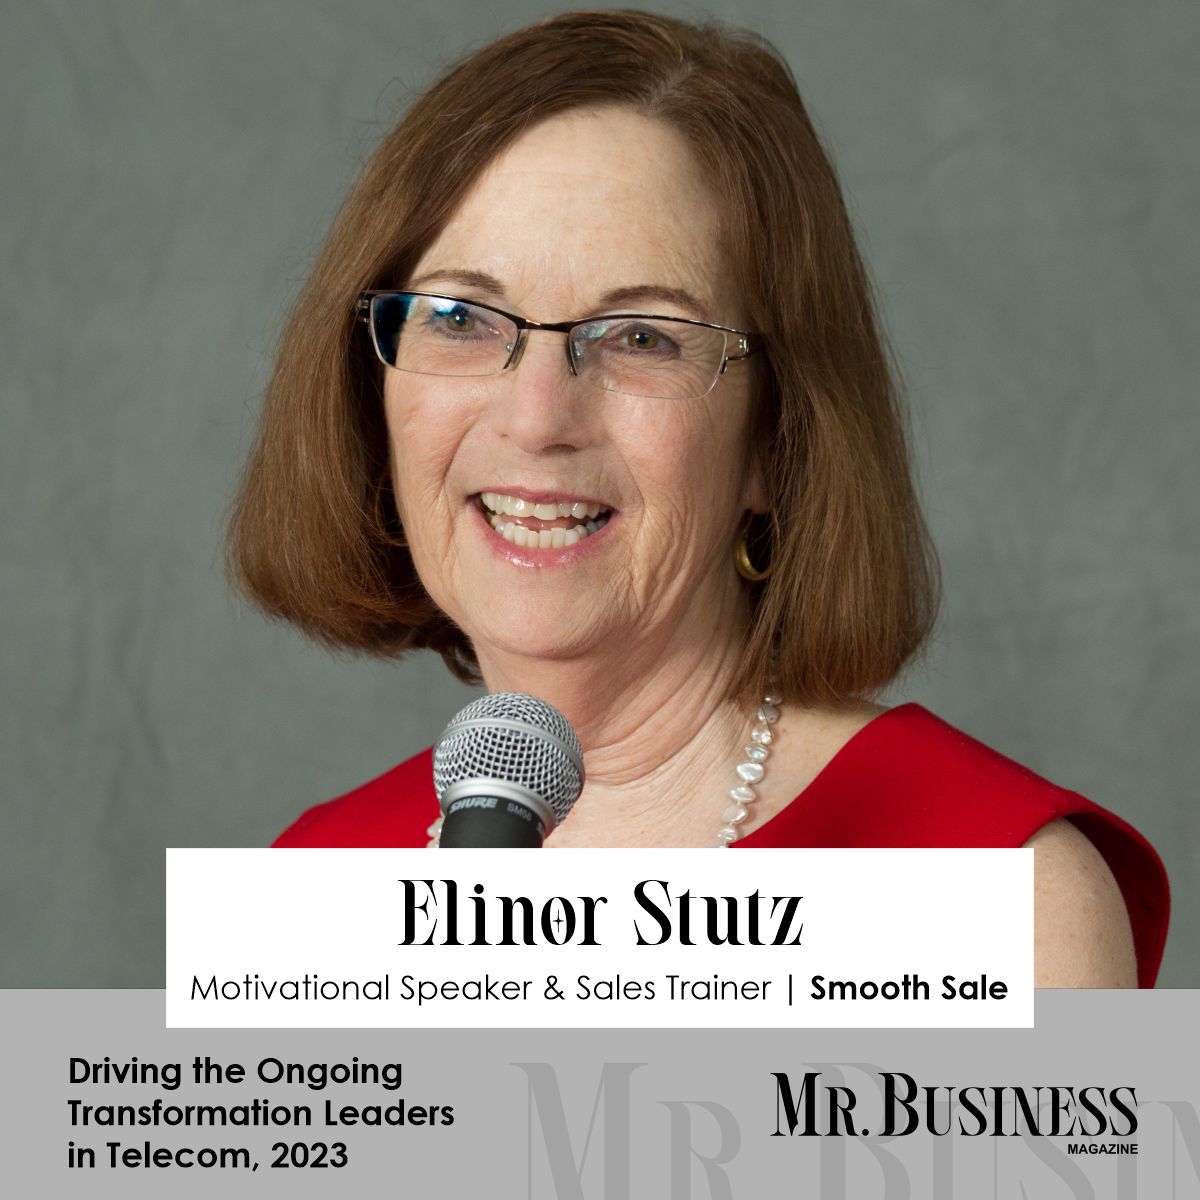 Elinor Stutz- A Networking And Sales Powerhouse!